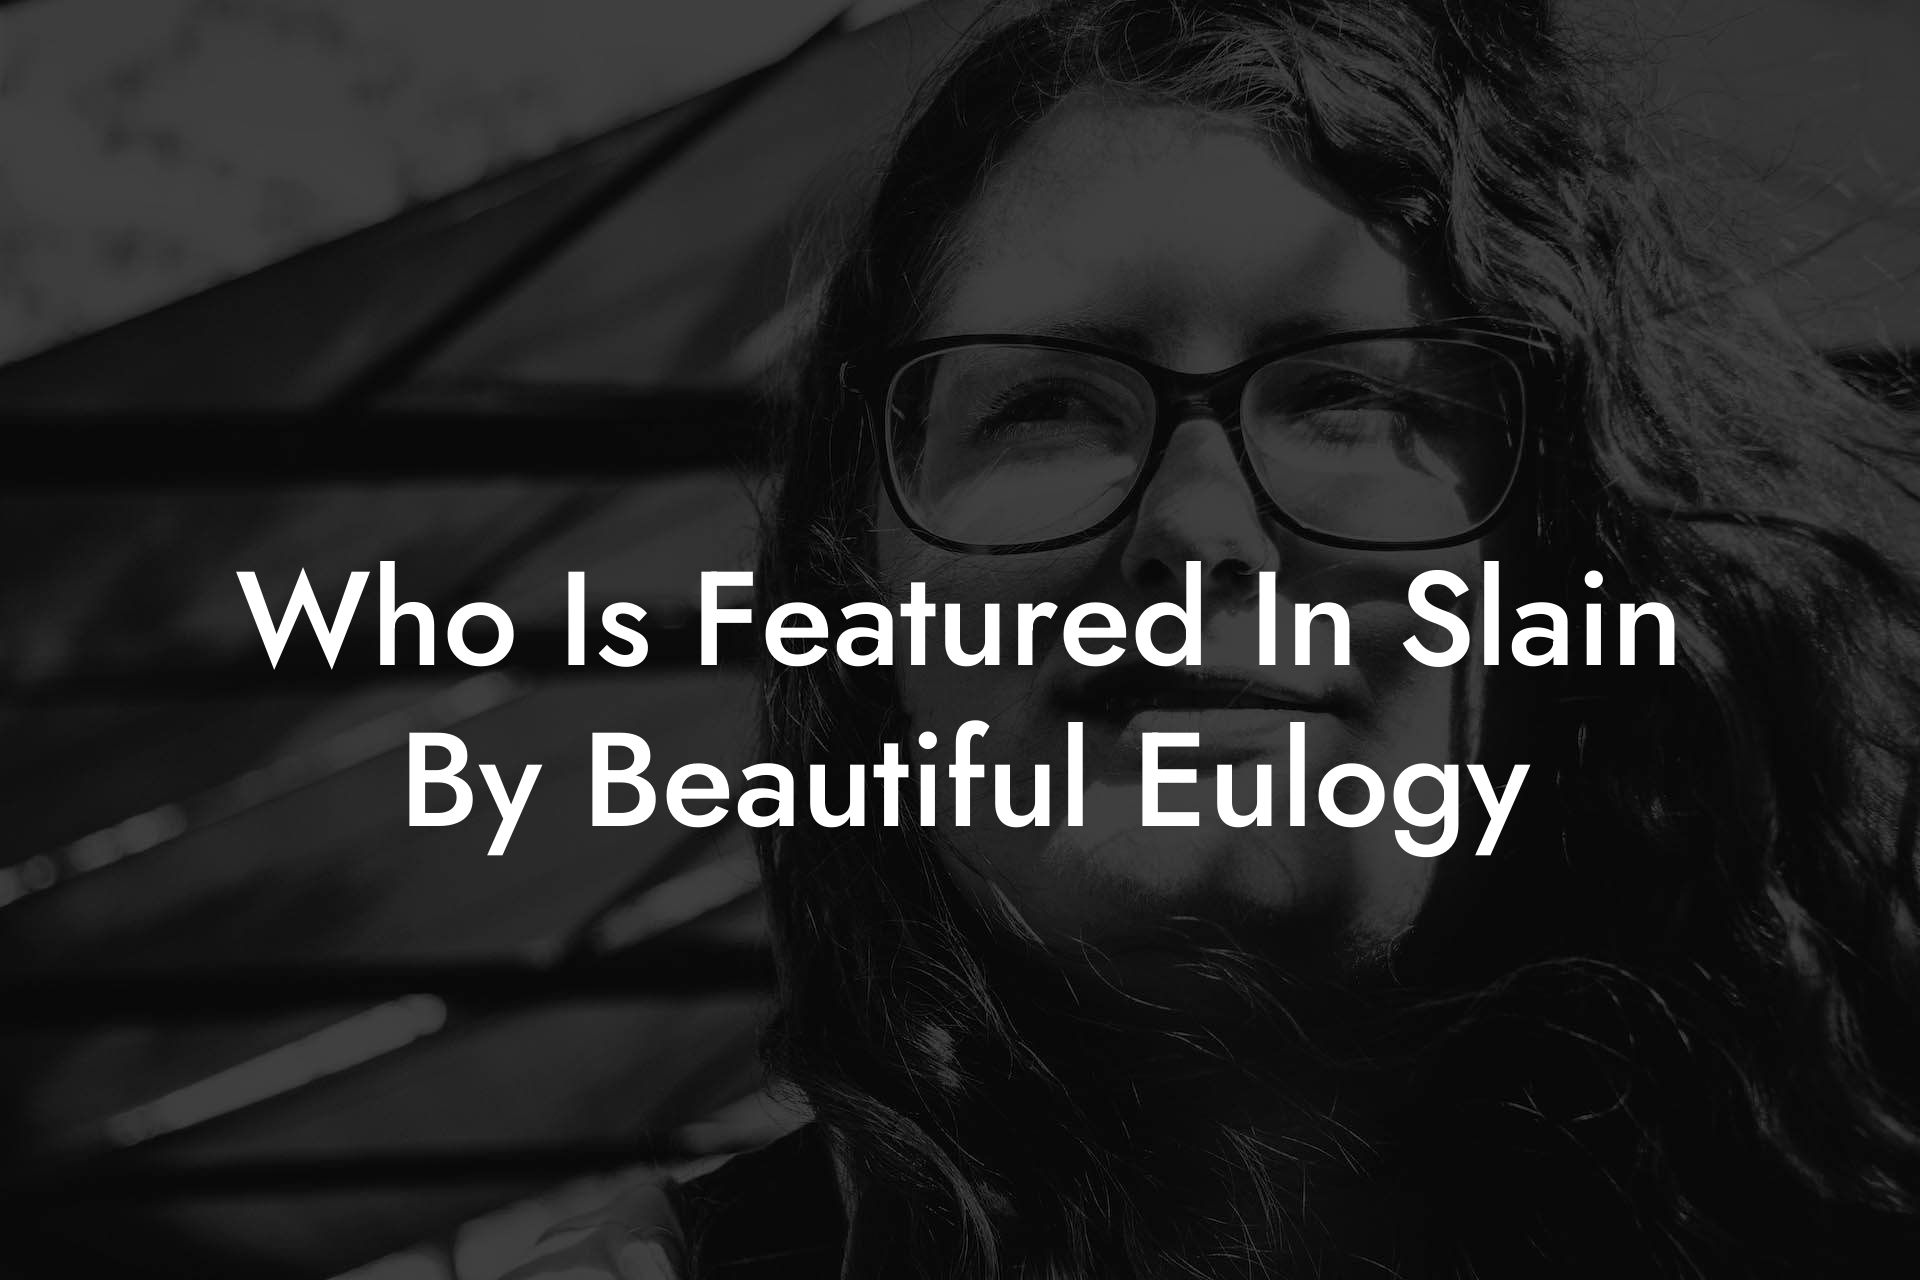 Who Is Featured In Slain By Beautiful Eulogy